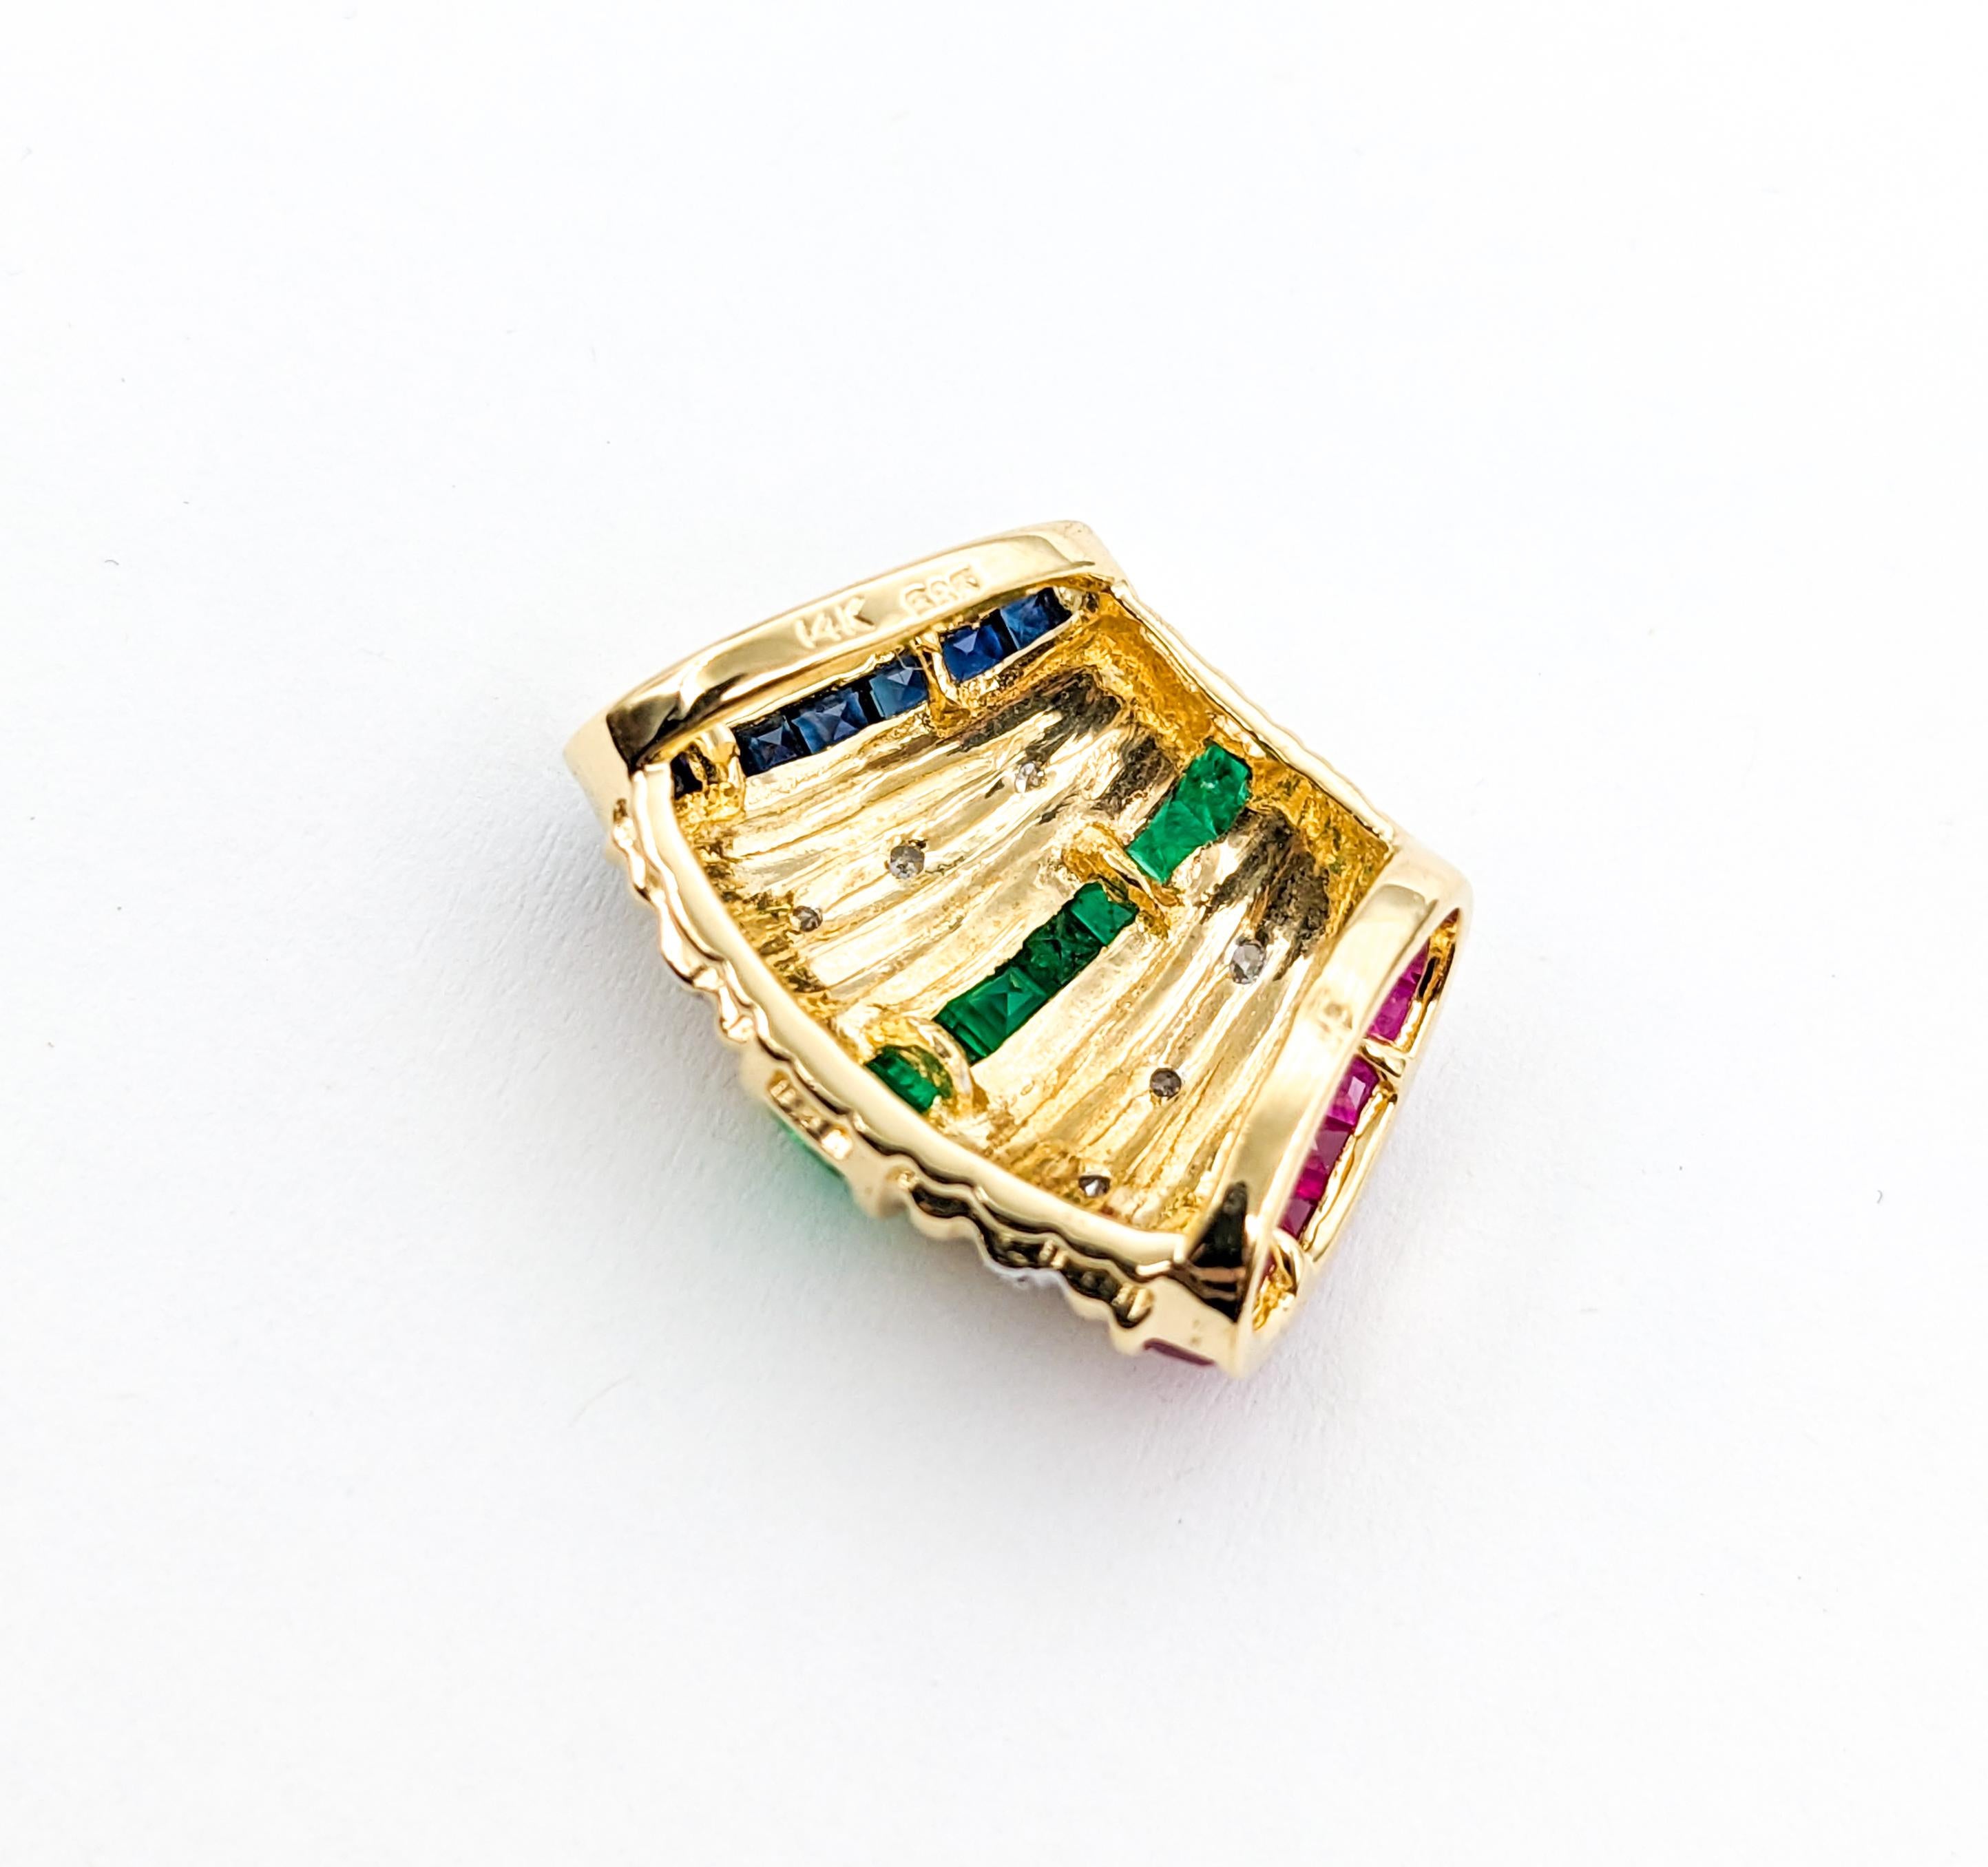  Ruby, Emerald, Sapphire & Diamond Slide Pendant In Yellow Gold In Excellent Condition For Sale In Bloomington, MN